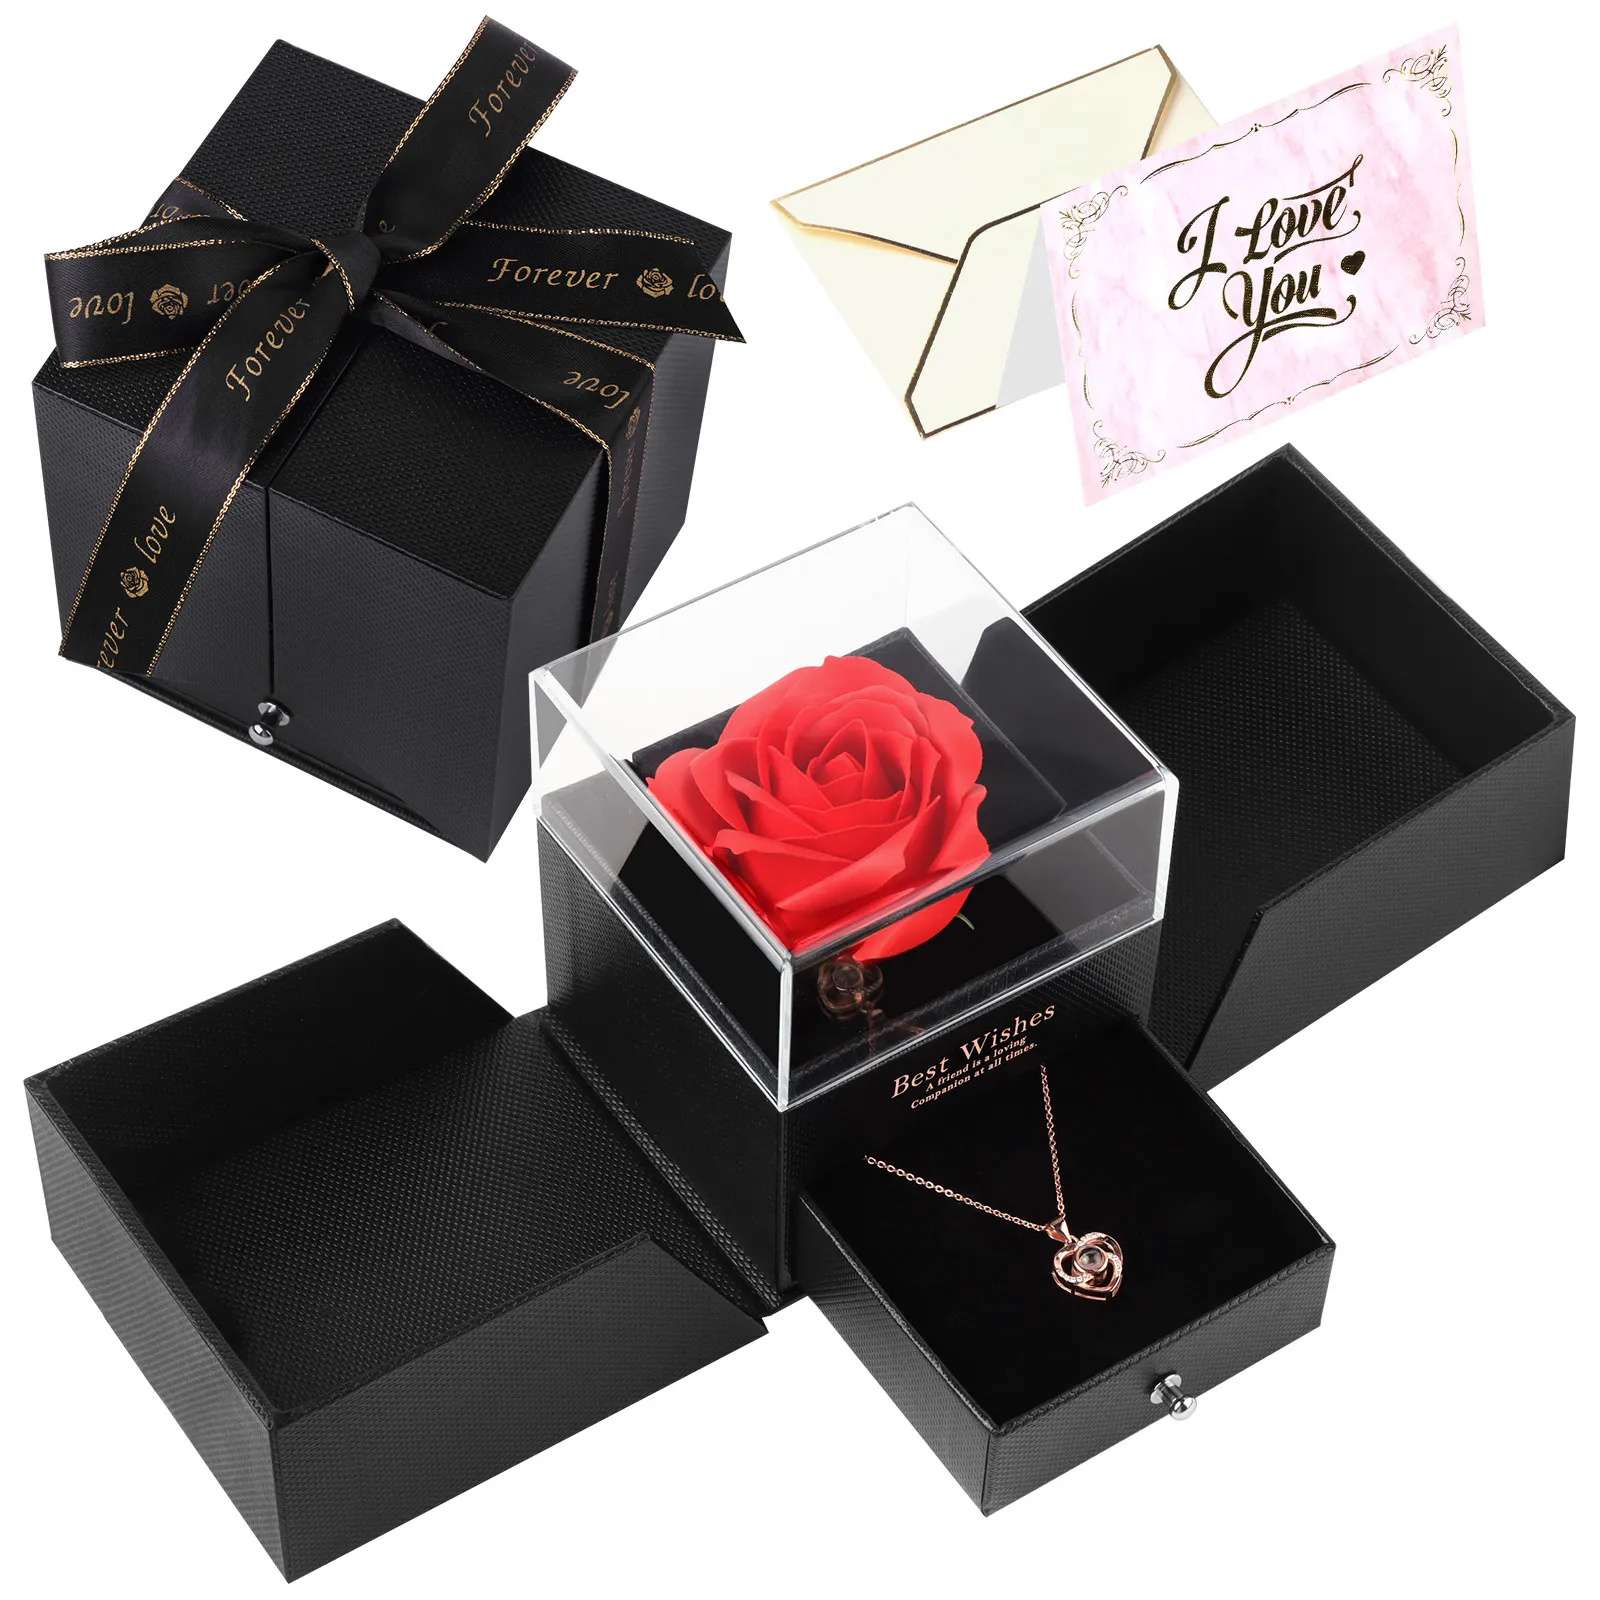 Other Festive Party Supplies Behogar Eternal Flower Soap Rose Jewelry Box with Heart Necklace Romantic Surprise Gift for Wife Girlfriend on Valentine Day 230206